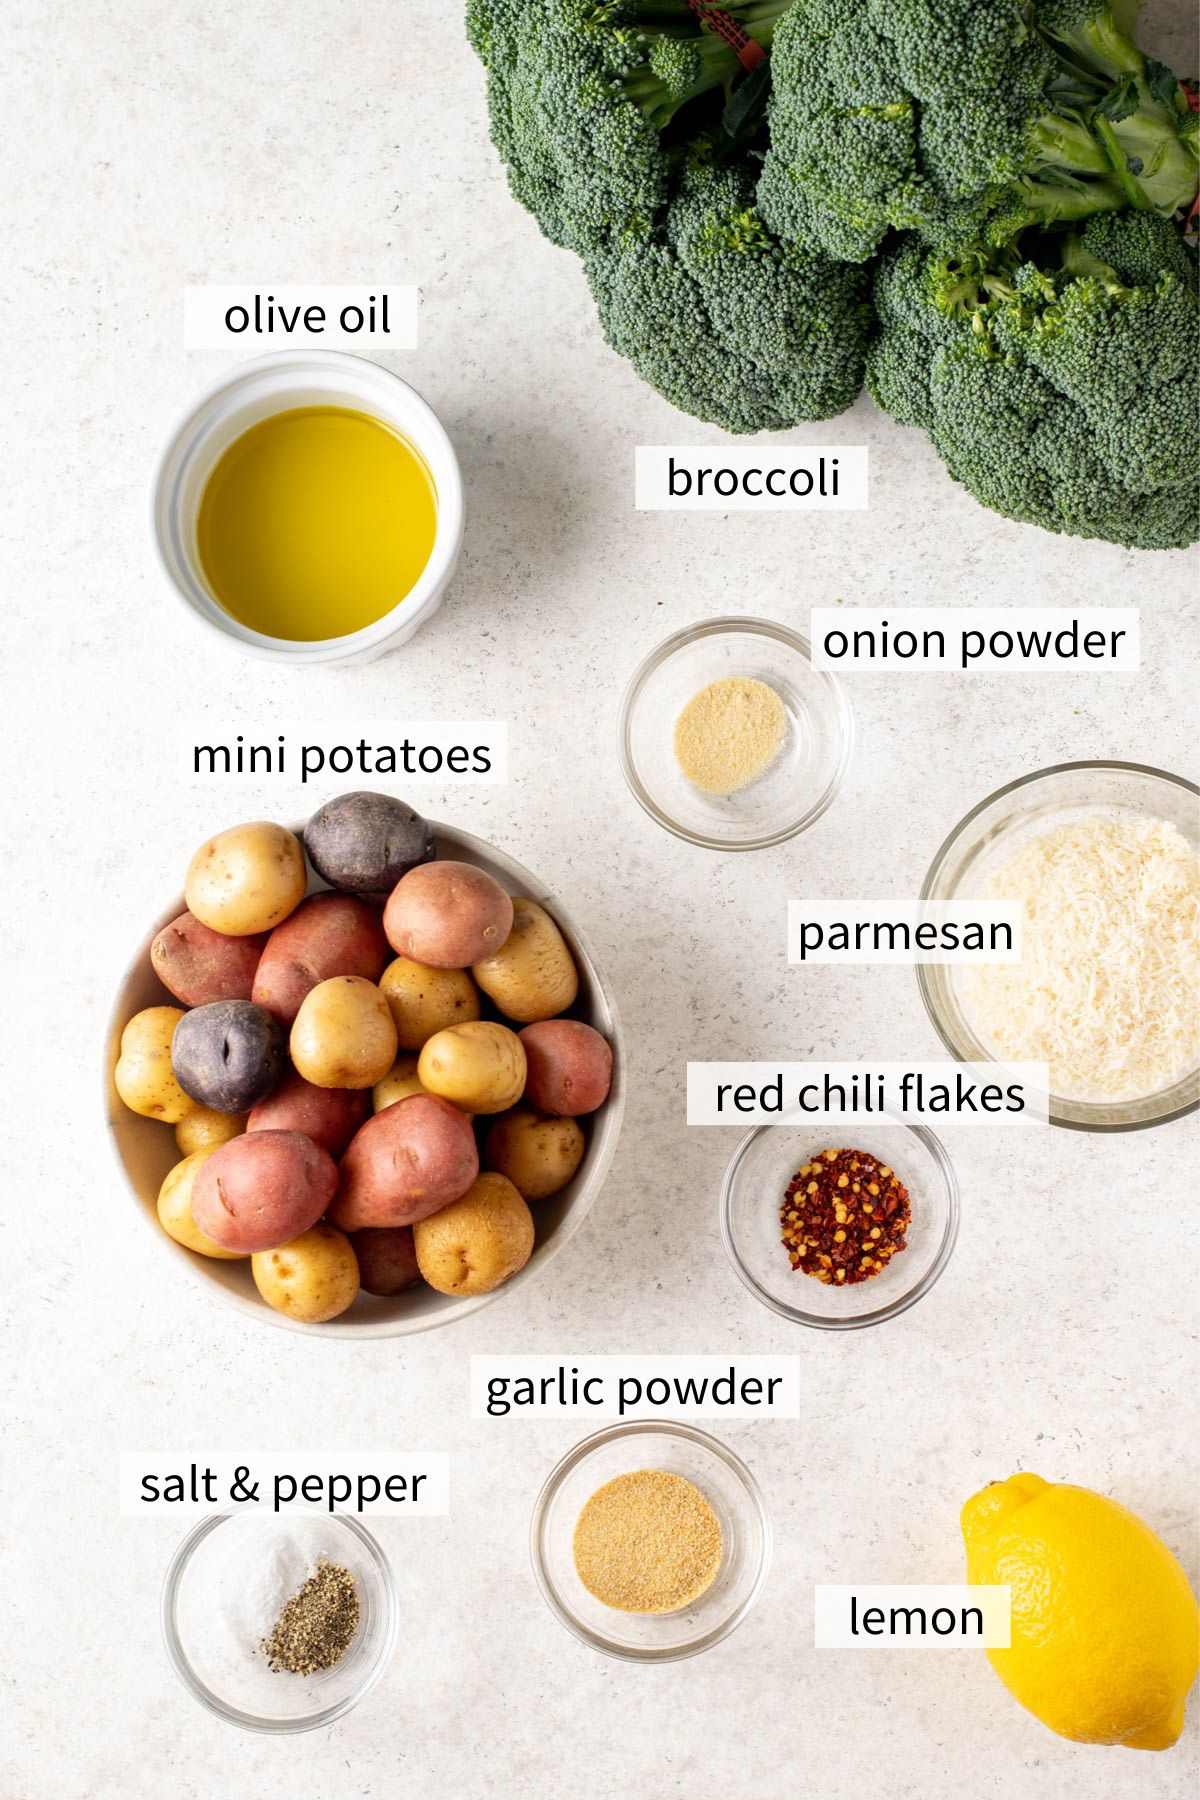 ingredients to make roasted potatoes and broccoli.